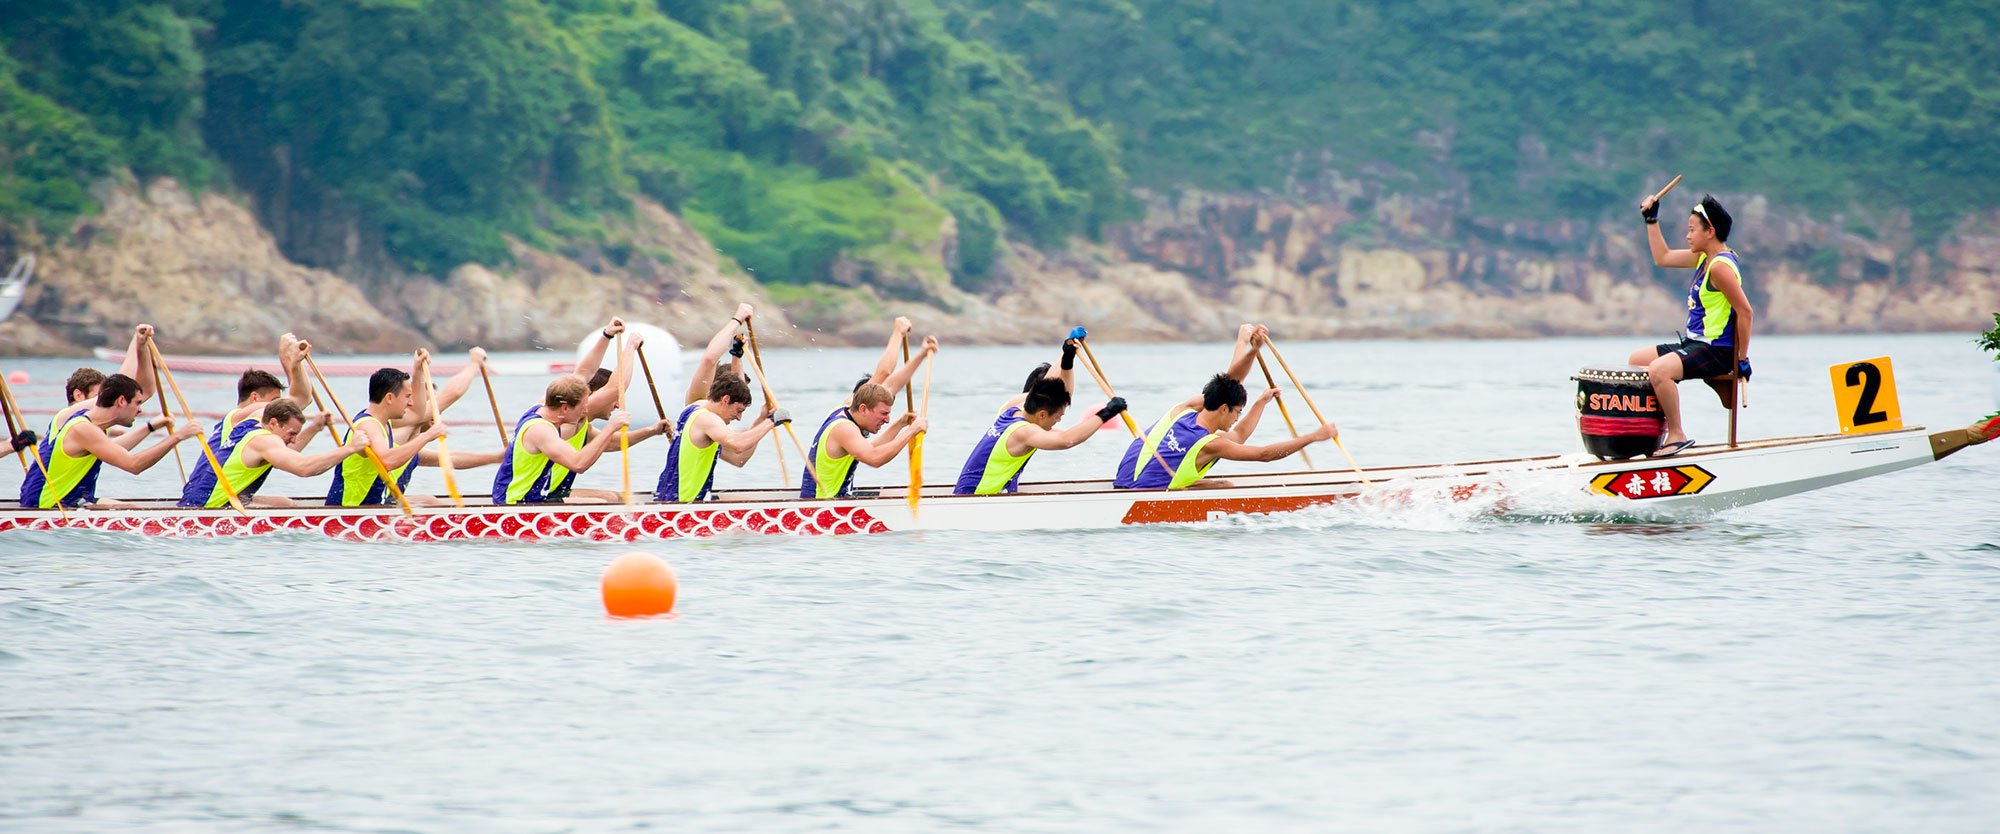 Arup team in the 2013 Dragon Boat Festival in Hong Kong